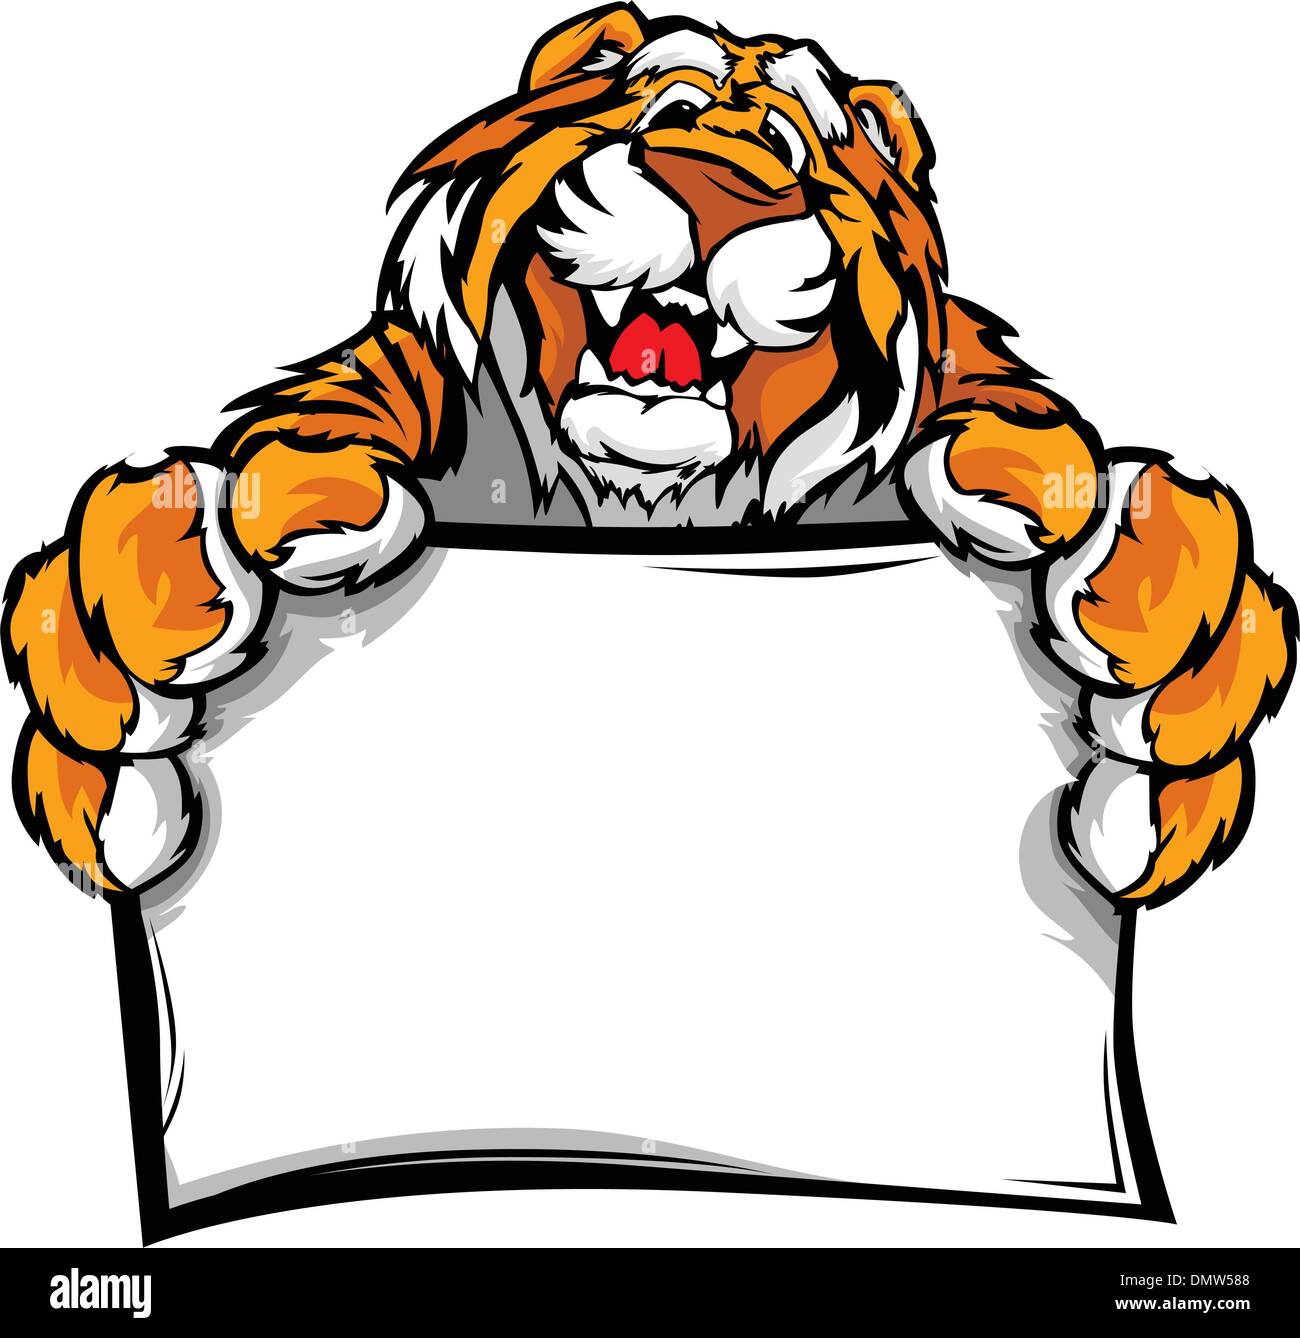 Graphic Vector Image of a Happy Cute Tiger Mascot holding sign Stock Vector